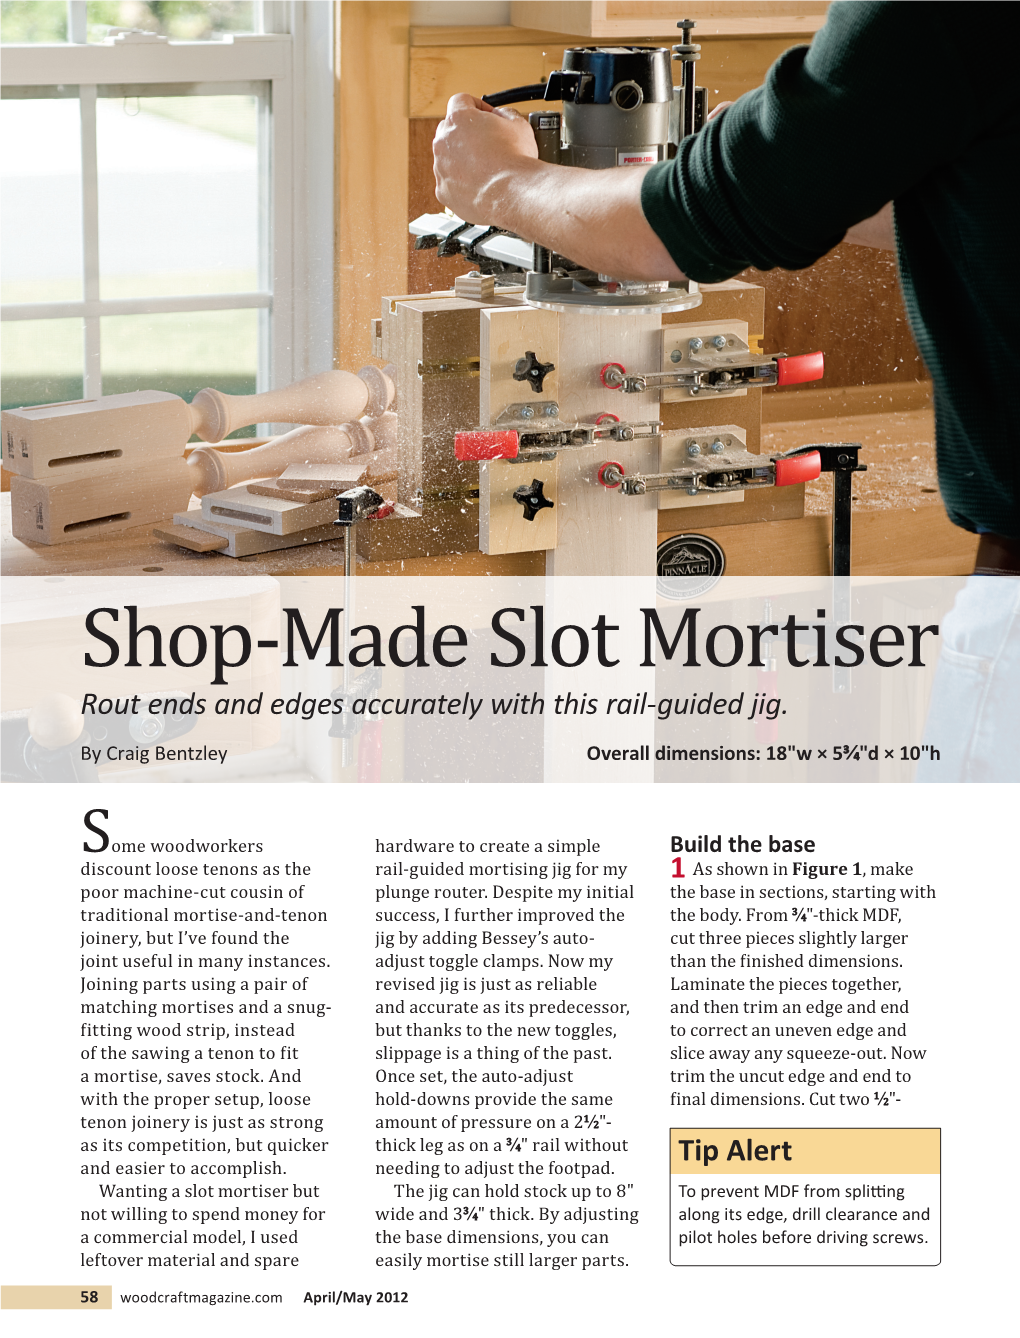 Shop-Made Slot Mortiser Rout Ends and Edges Accurately with This Rail-Guided Jig